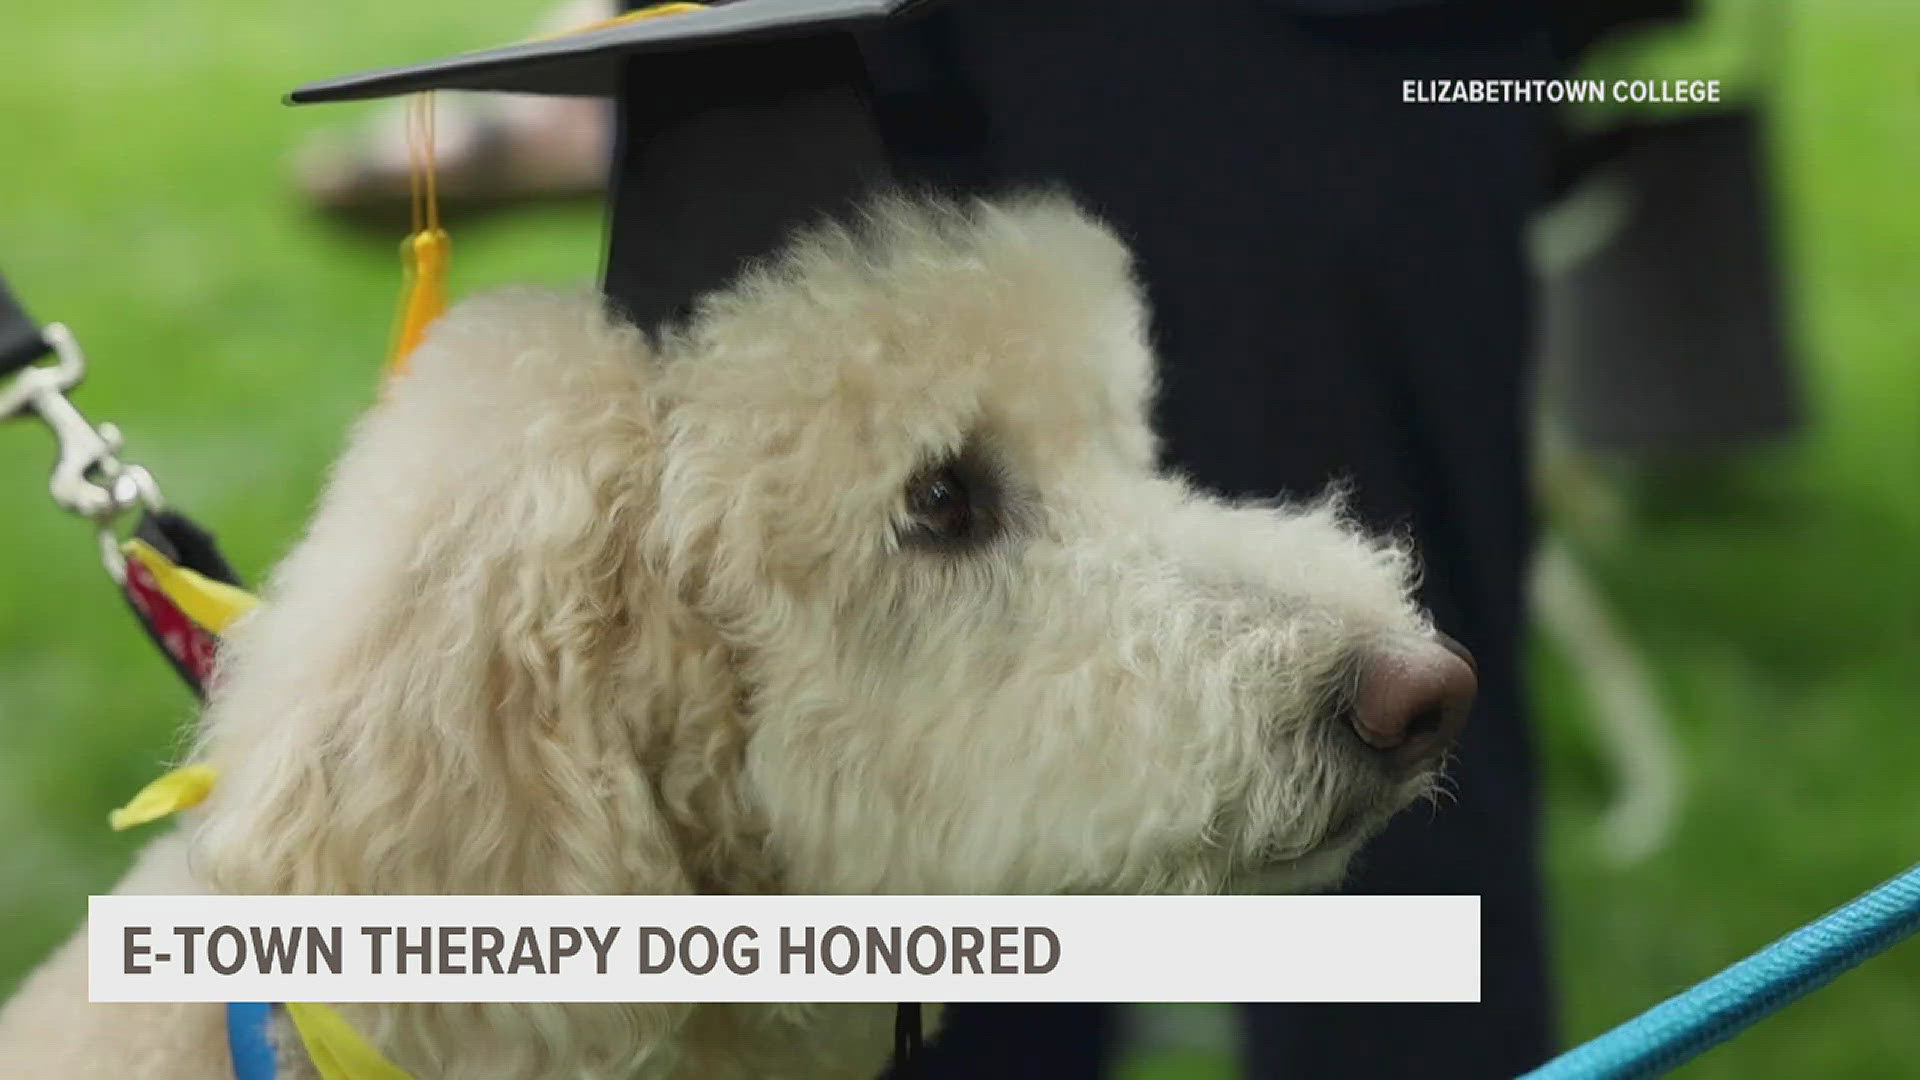 Elizabethtown College honored a four-legged friend who has helped students the past decade.